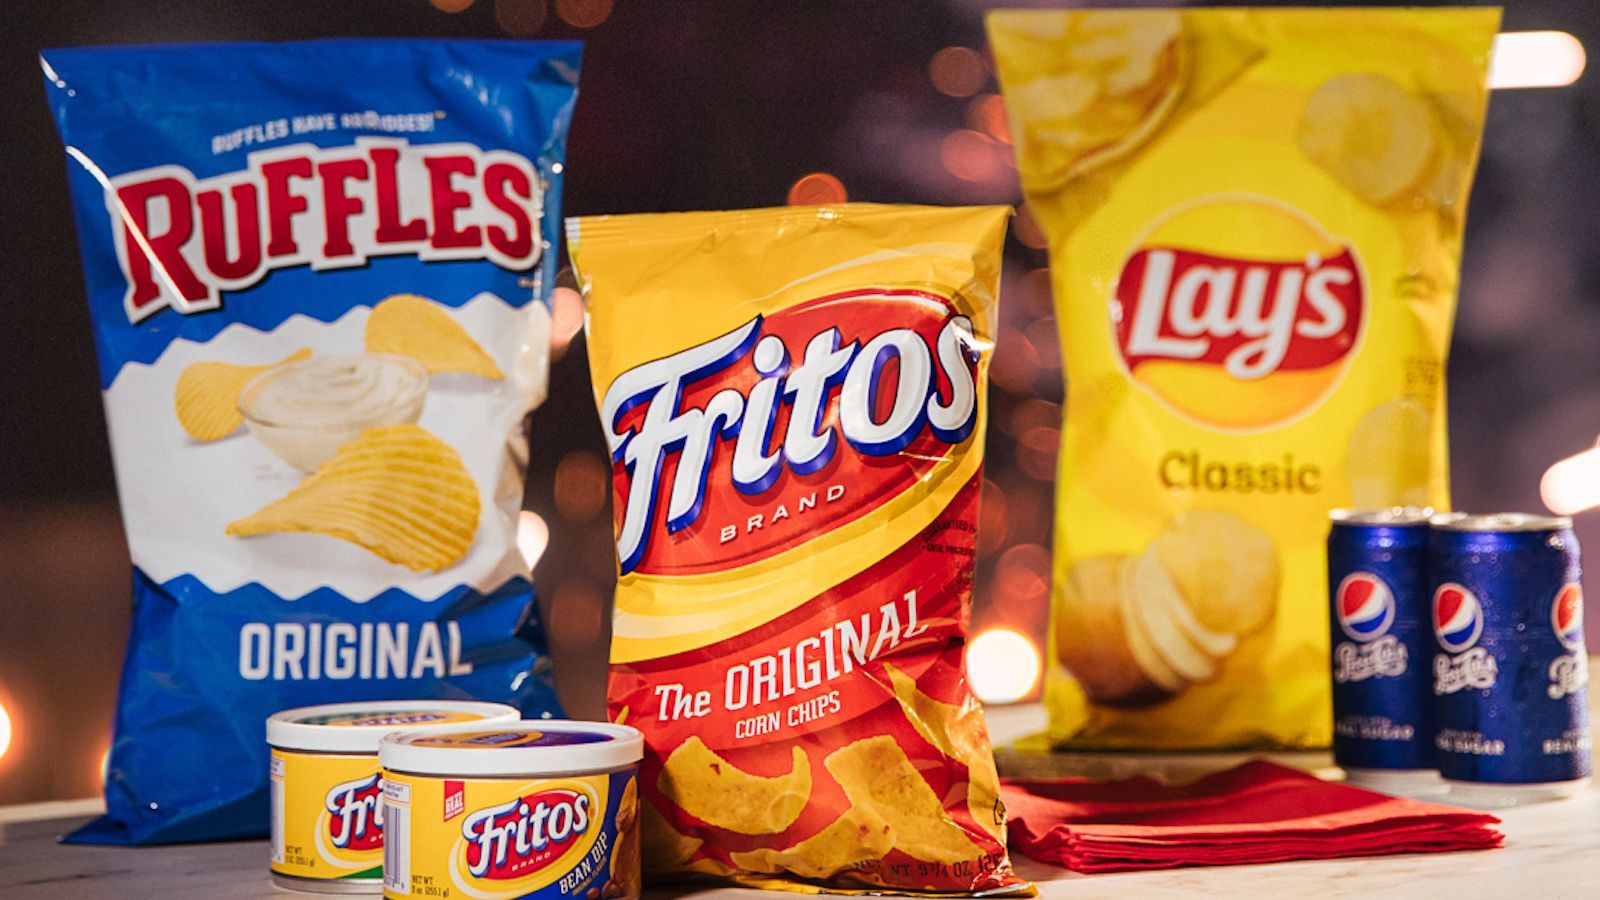 Frito Lay Snacks Emerge As Pandemic Winner With Cheetos Hungry Americans Stocking Up On Comfort